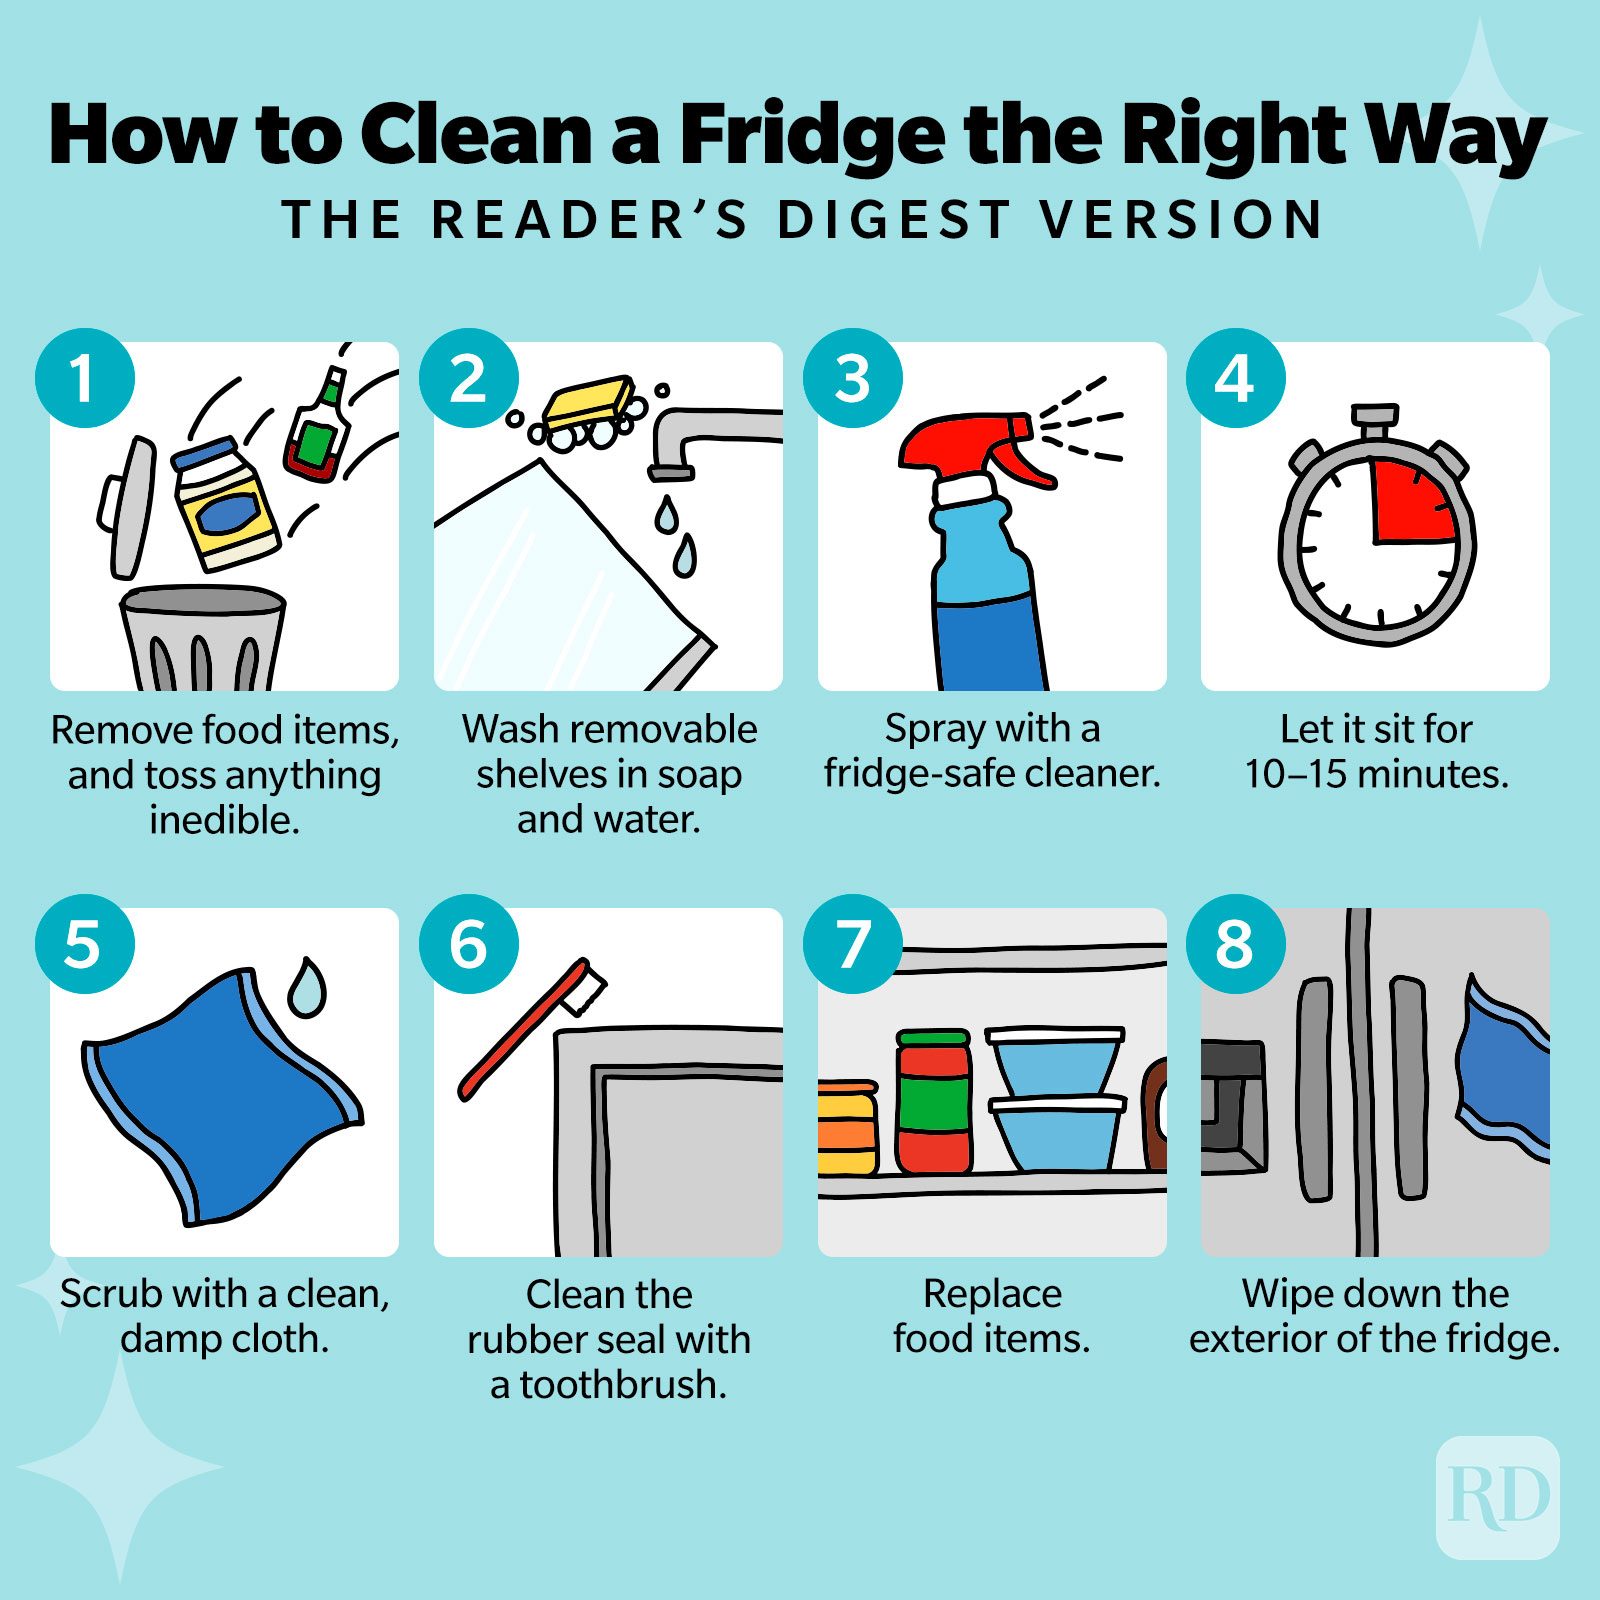 How to Clean: 45 Housecleaning Tips for Every Room of Your Home